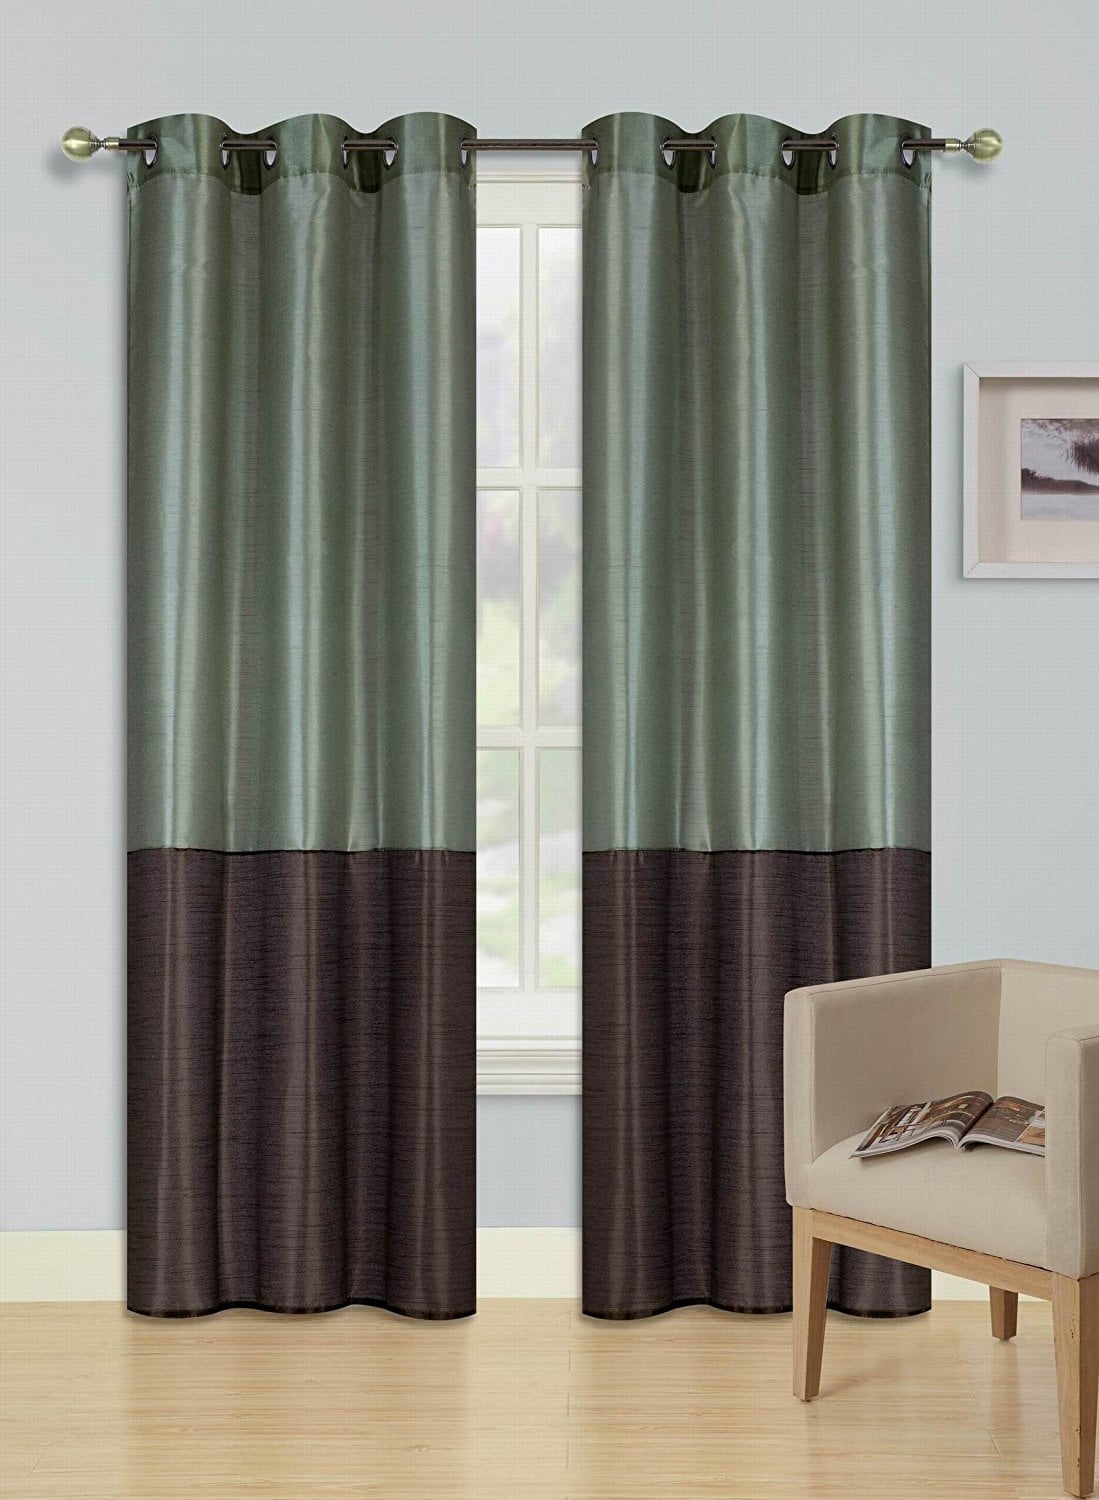 1PC New 2-TONE Window Curtain Grommet Panel Lined Blackout EID SILVER GREY BROWN 